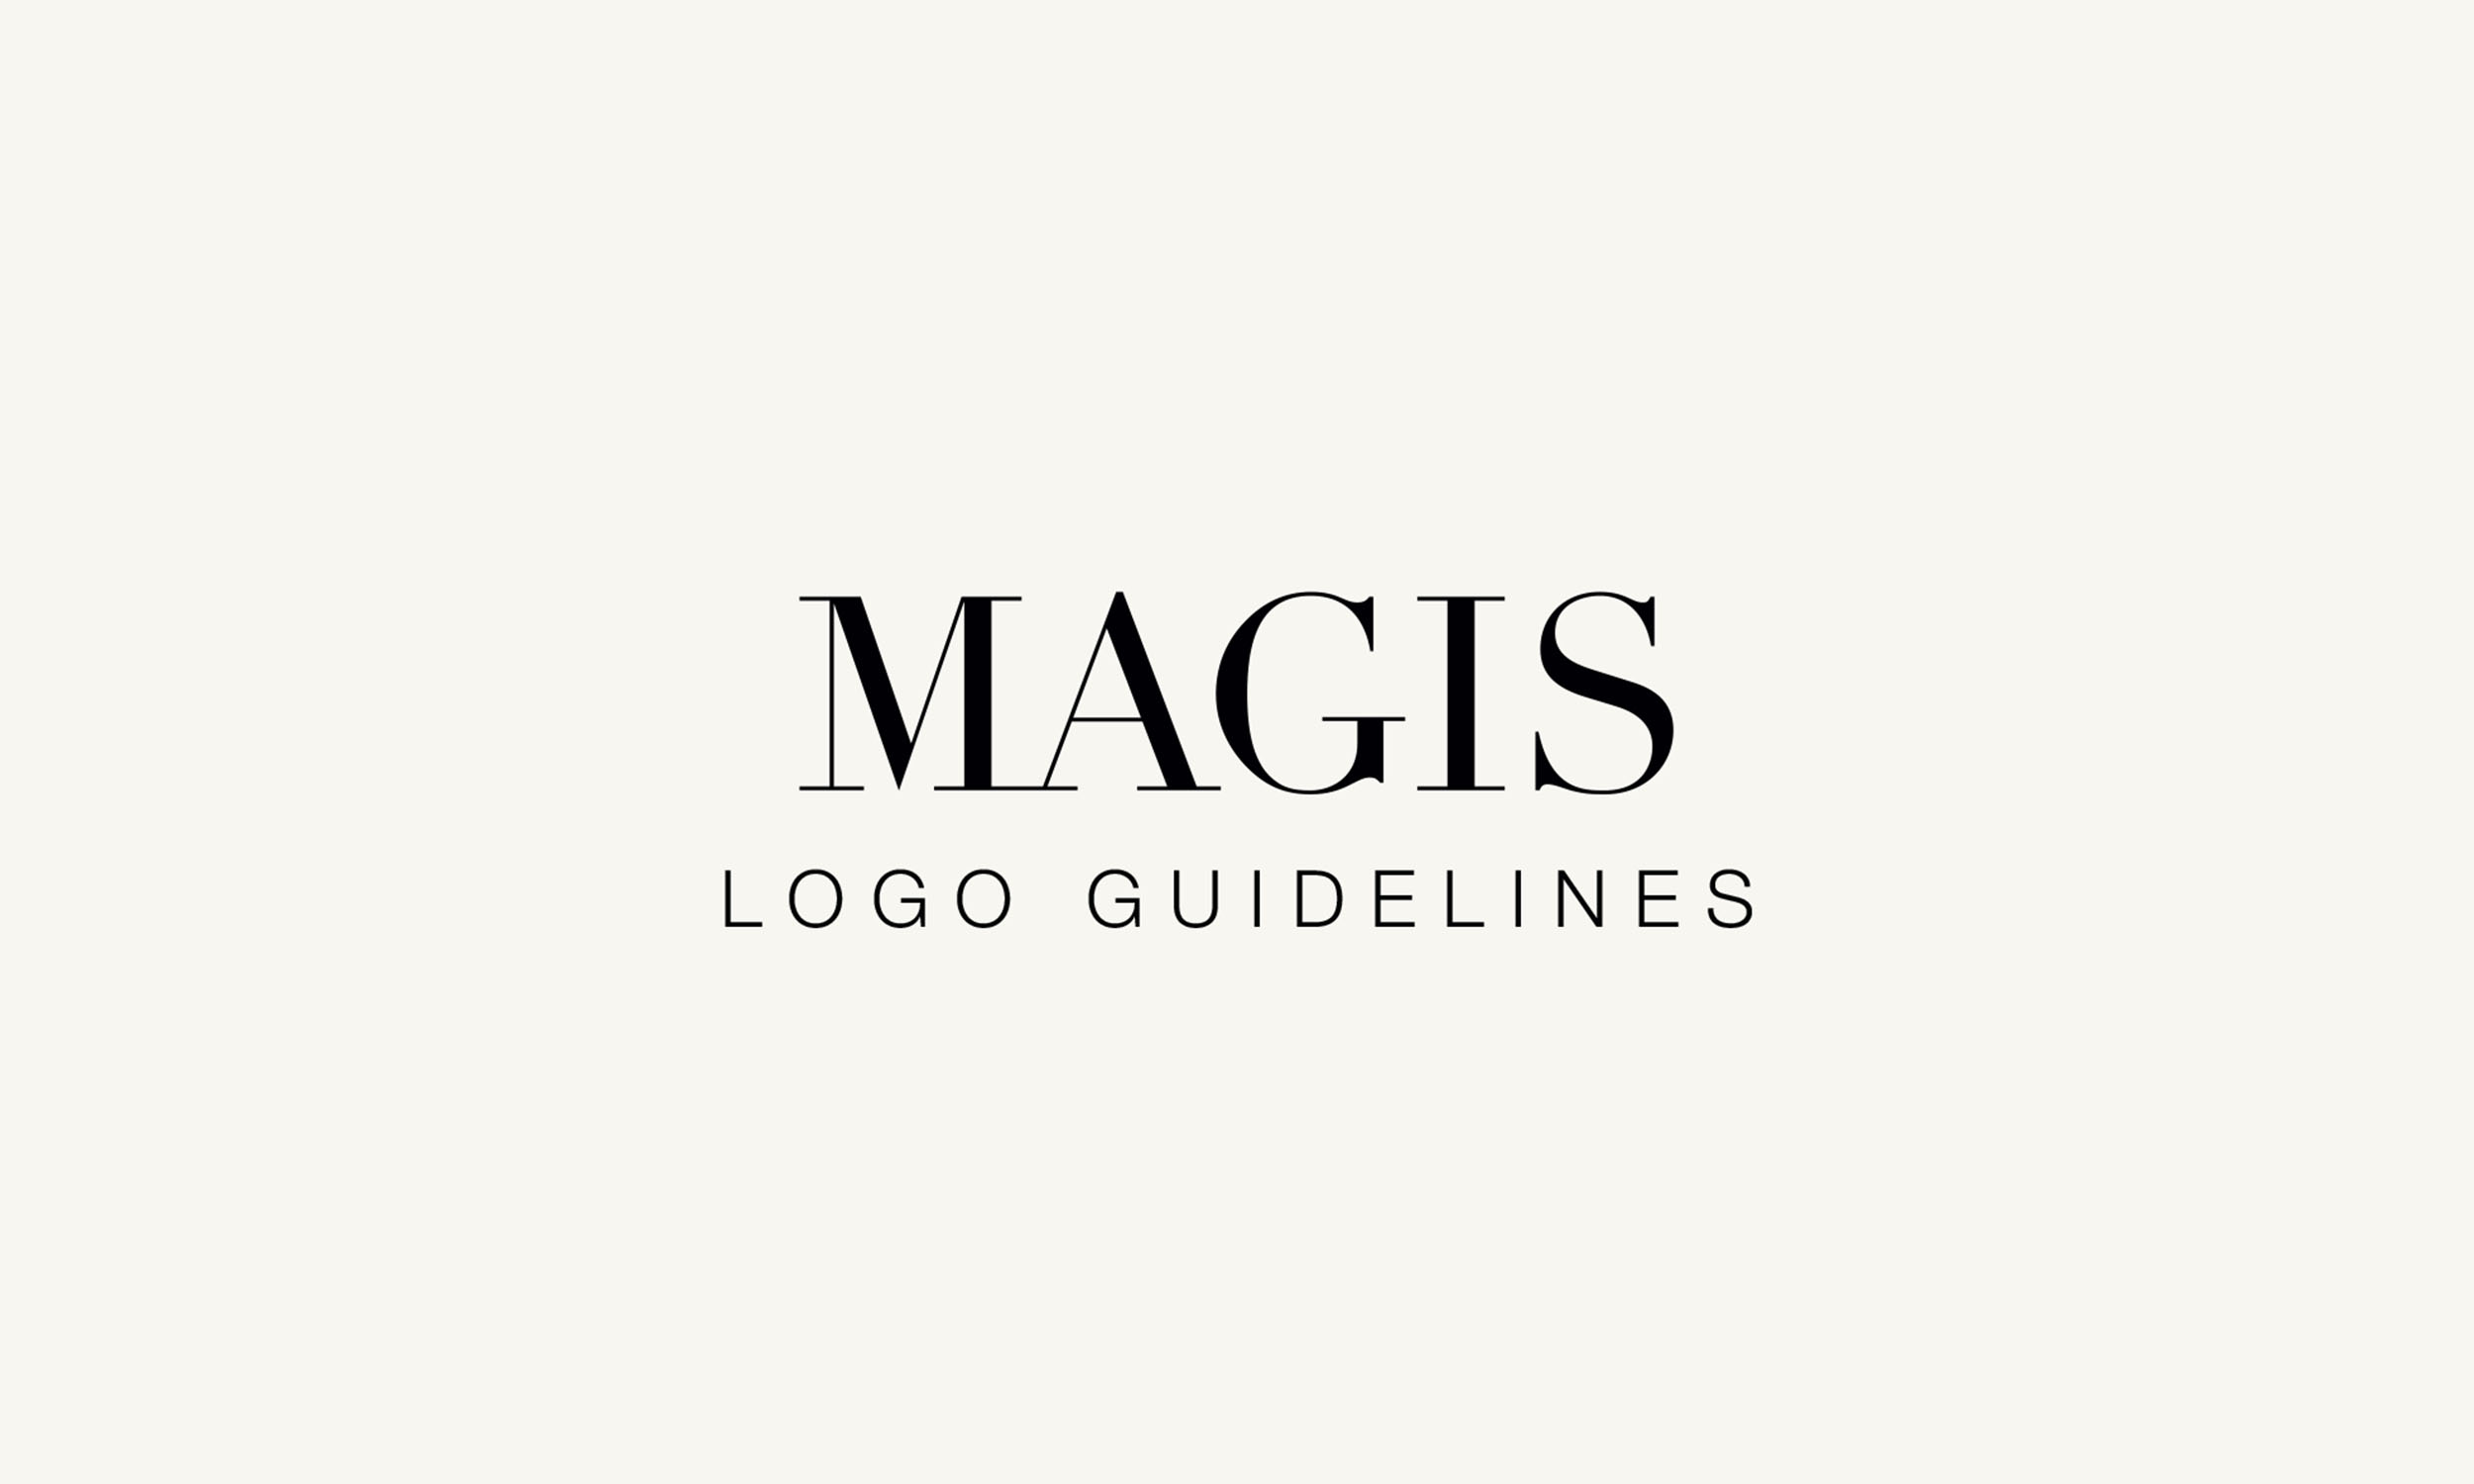 Logo Guidelines - Magis S.p.A.